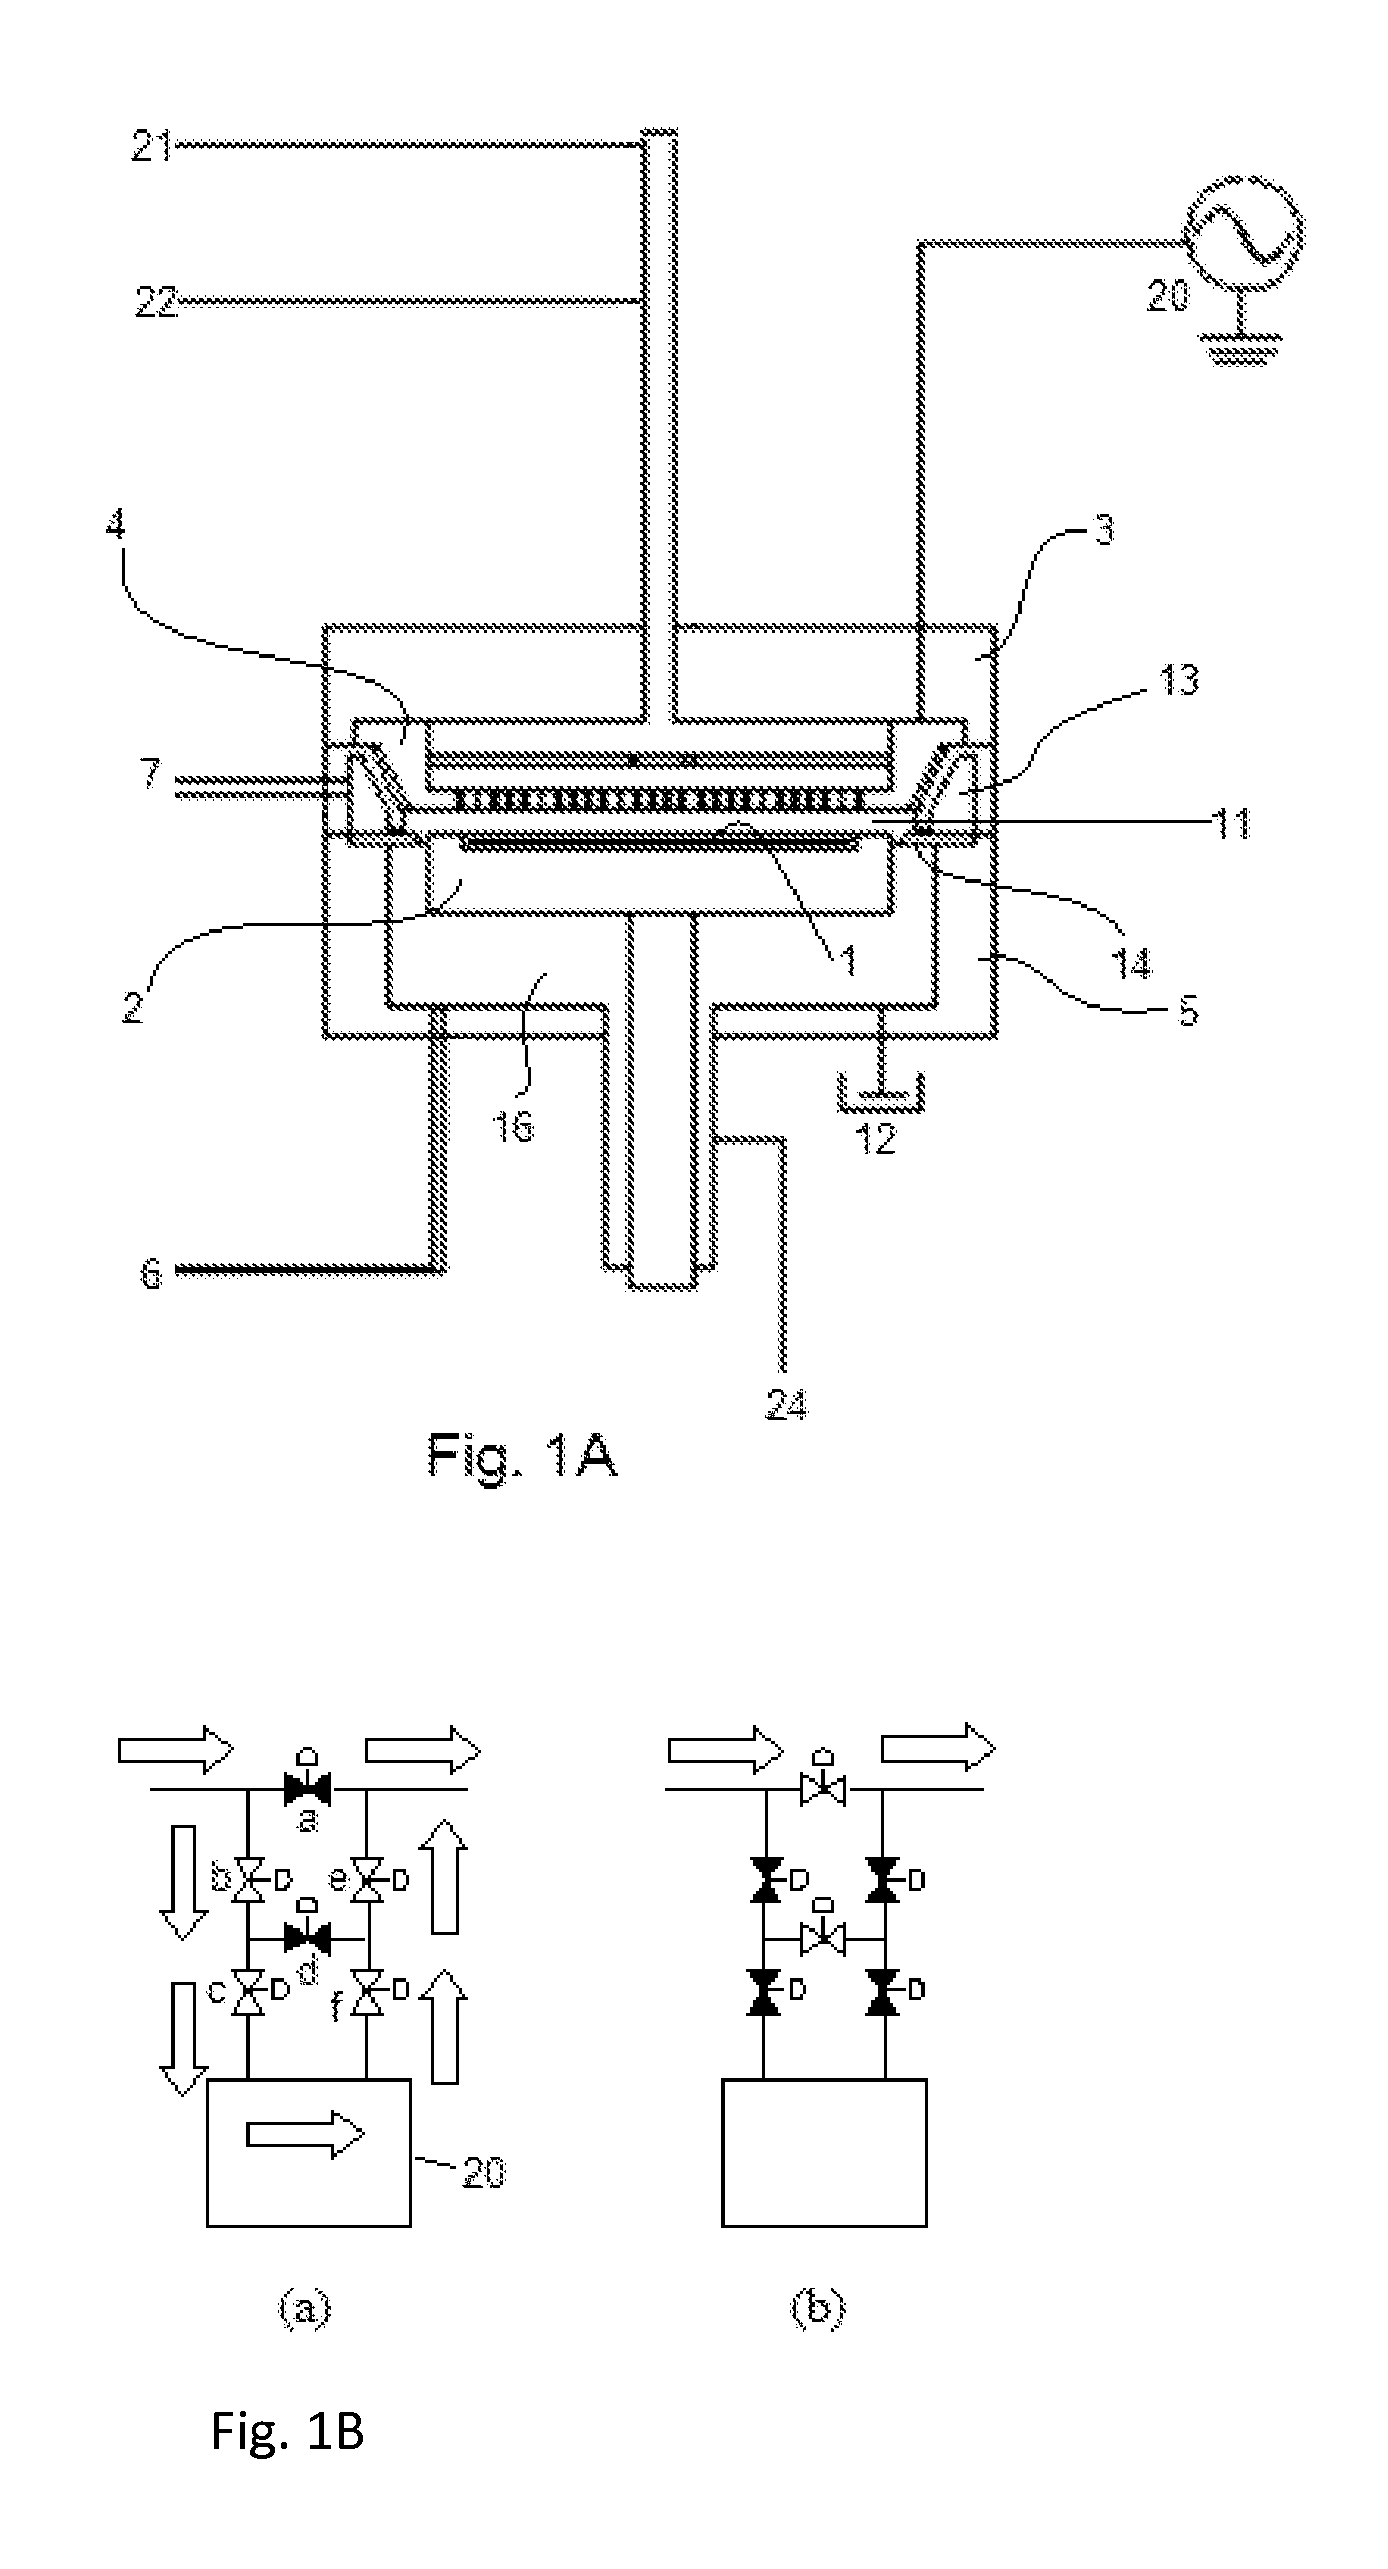 Method for forming dielectric film in trenches by PEALD using H-containing gas